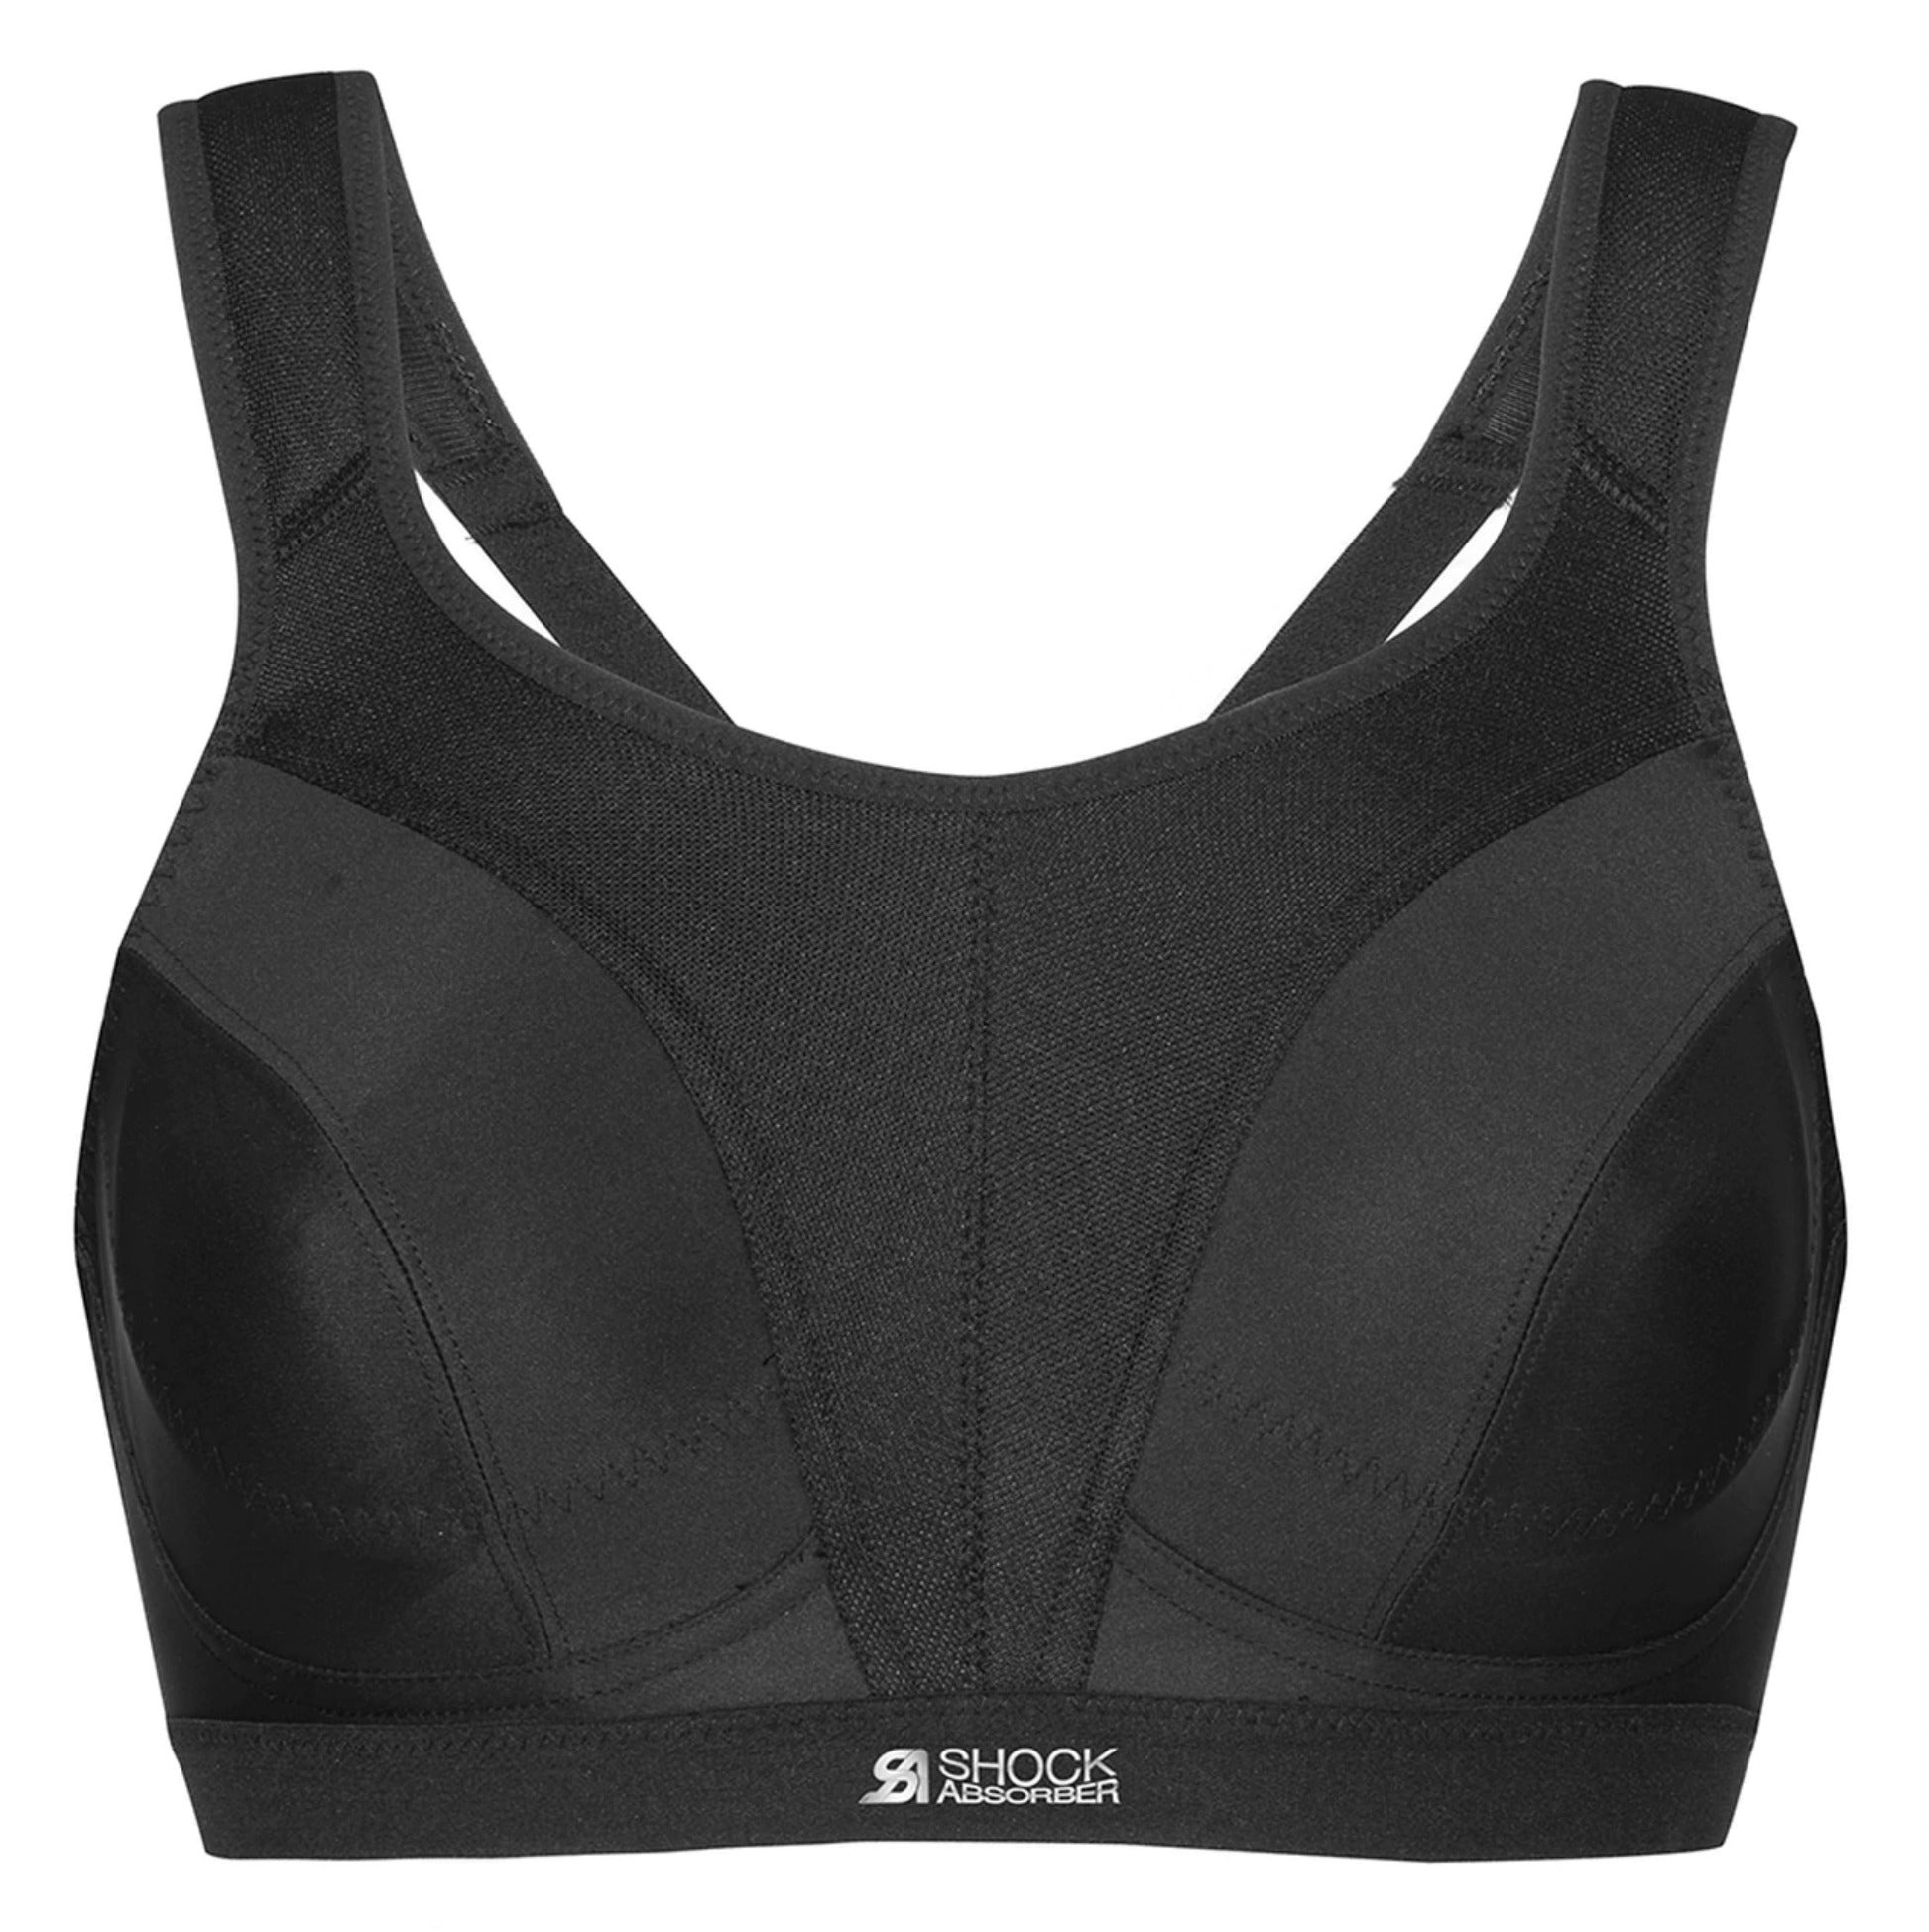 Shock Absorber Active classic support sports bra in black, £37.00